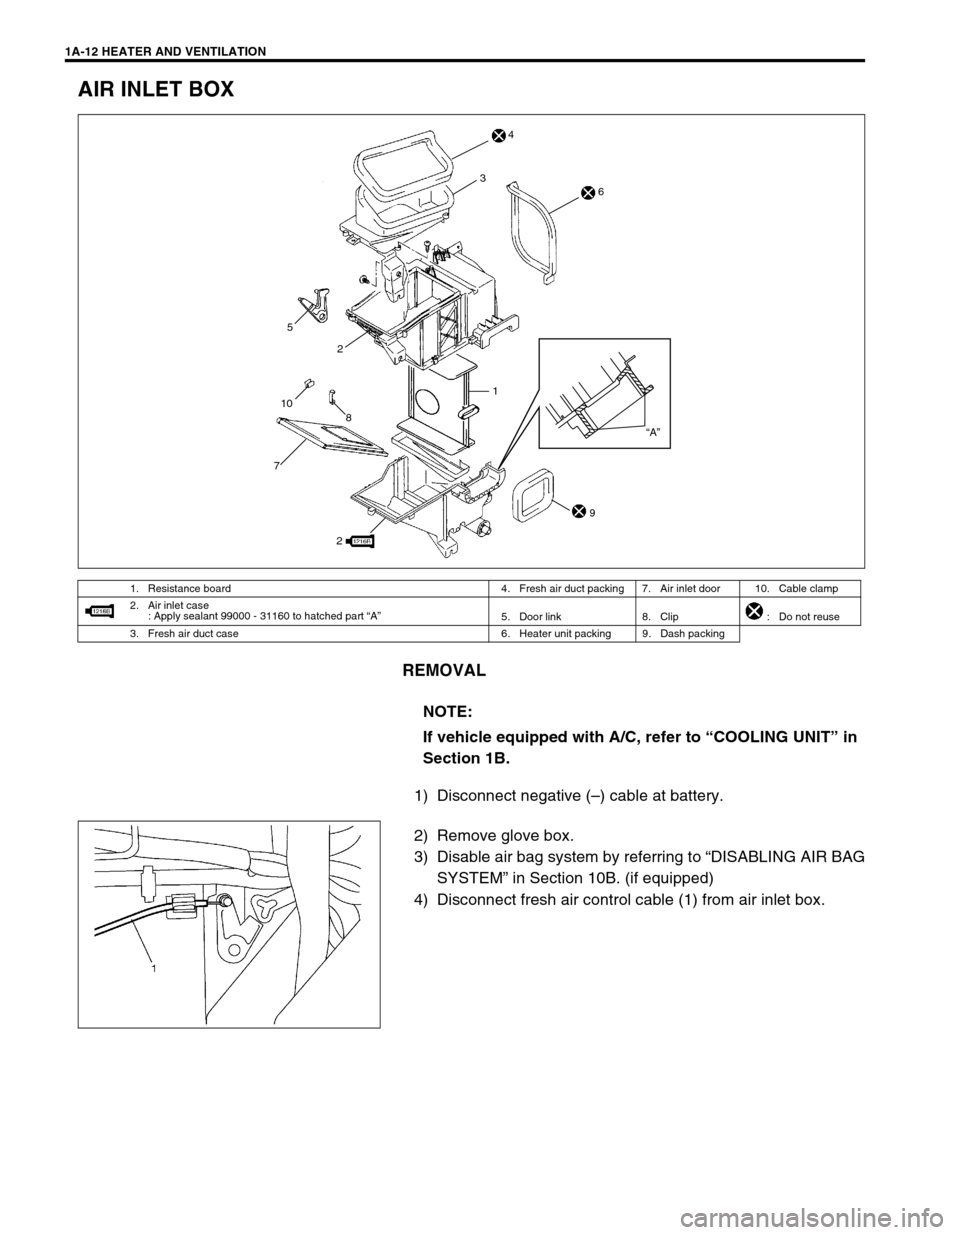 SUZUKI SWIFT 2000 1.G RG413 Service Workshop Manual 1A-12 HEATER AND VENTILATION
AIR INLET BOX
REMOVAL
1) Disconnect negative (–) cable at battery.
2) Remove glove box.
3) Disable air bag system by referring to “DISABLING AIR BAG
SYSTEM” in Secti